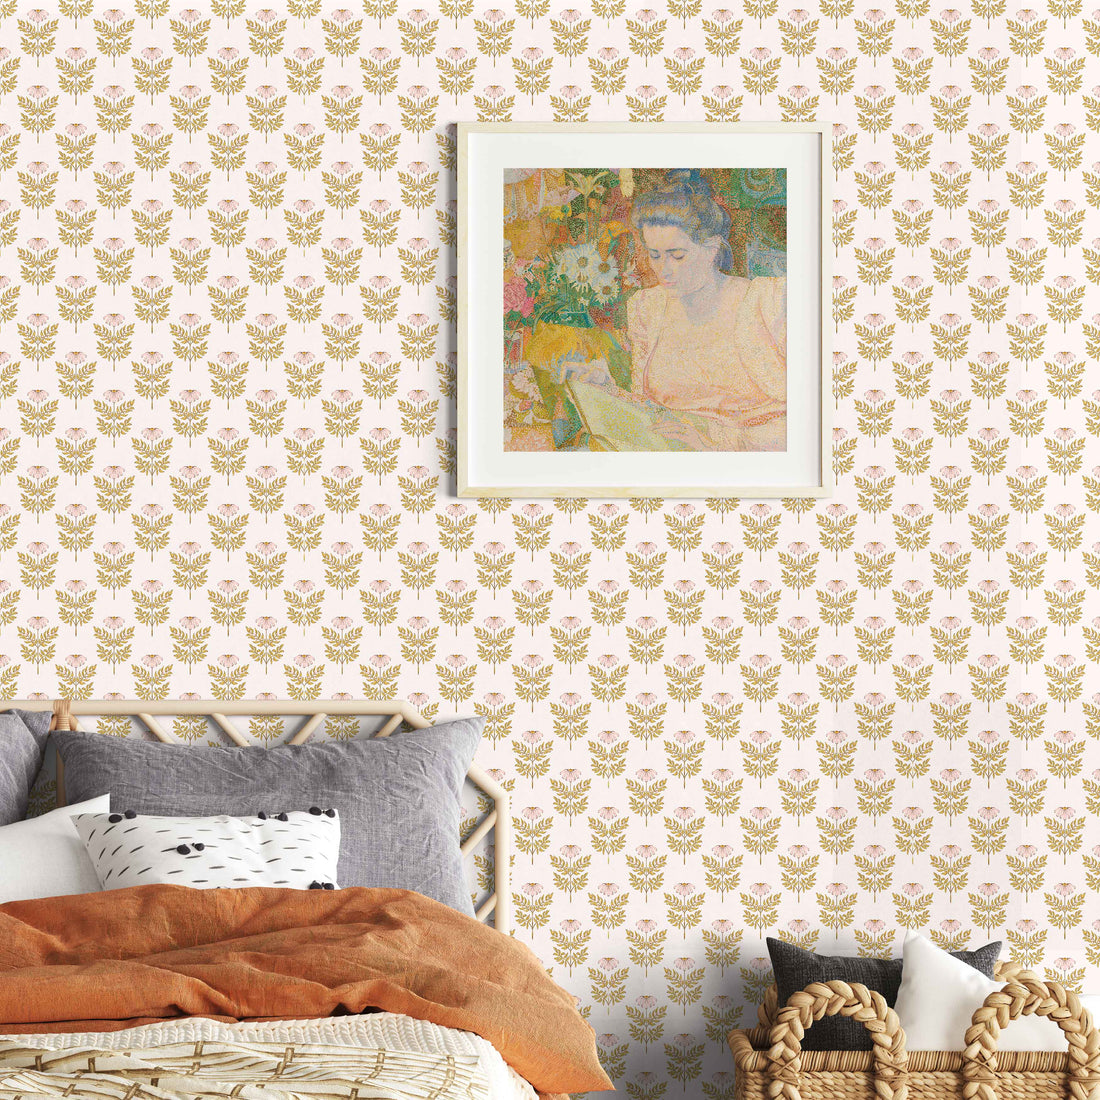 Huggleberry Hill Painted Daisies Wallpaper Room